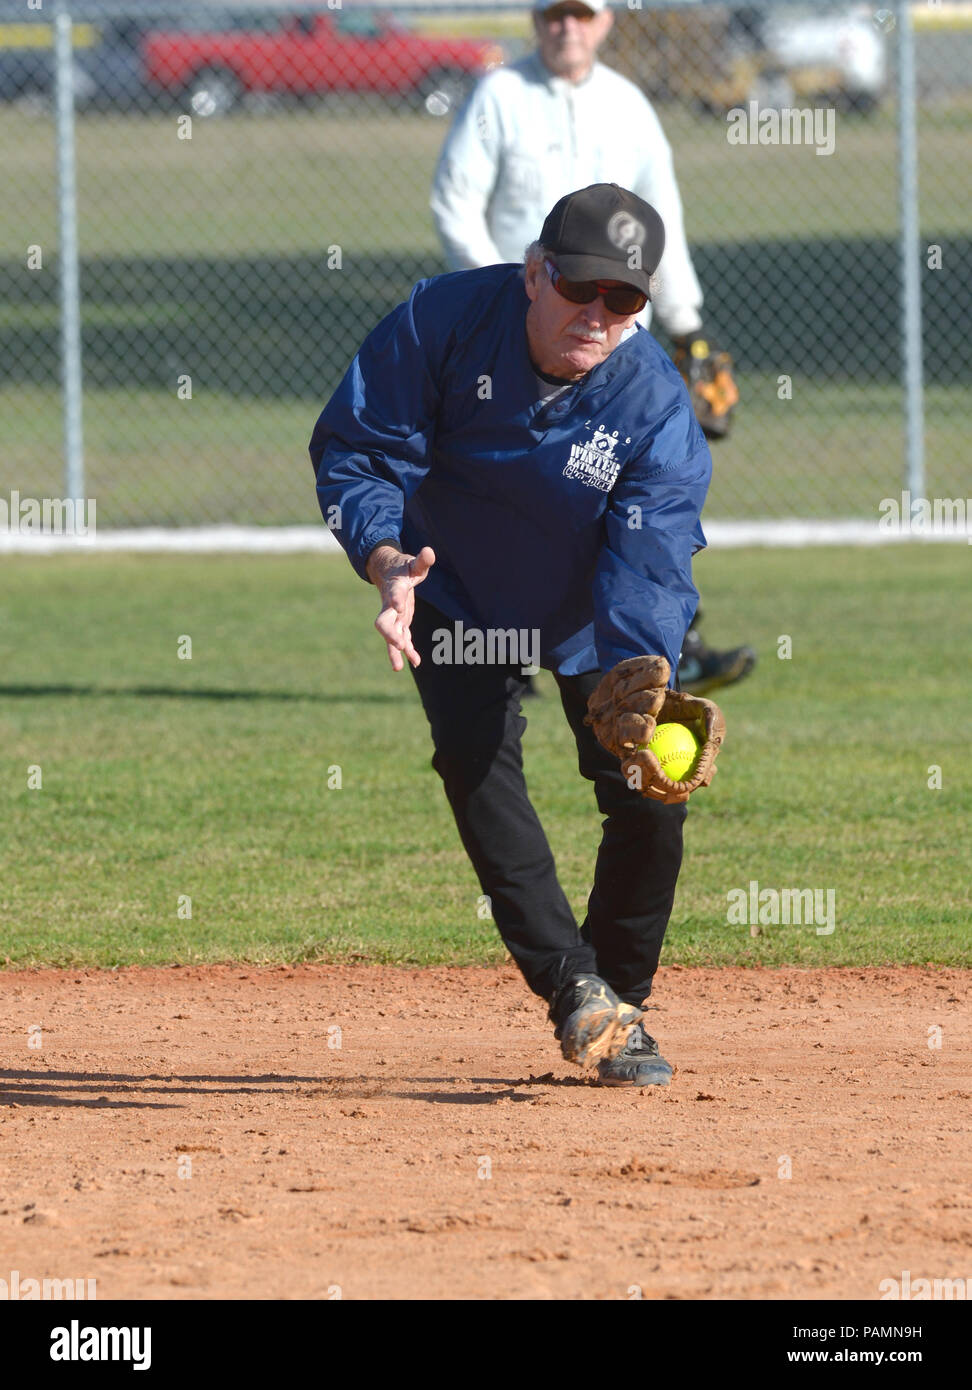 An older infielder makes a play during senior sofball play in Venice, Florida. Stock Photo